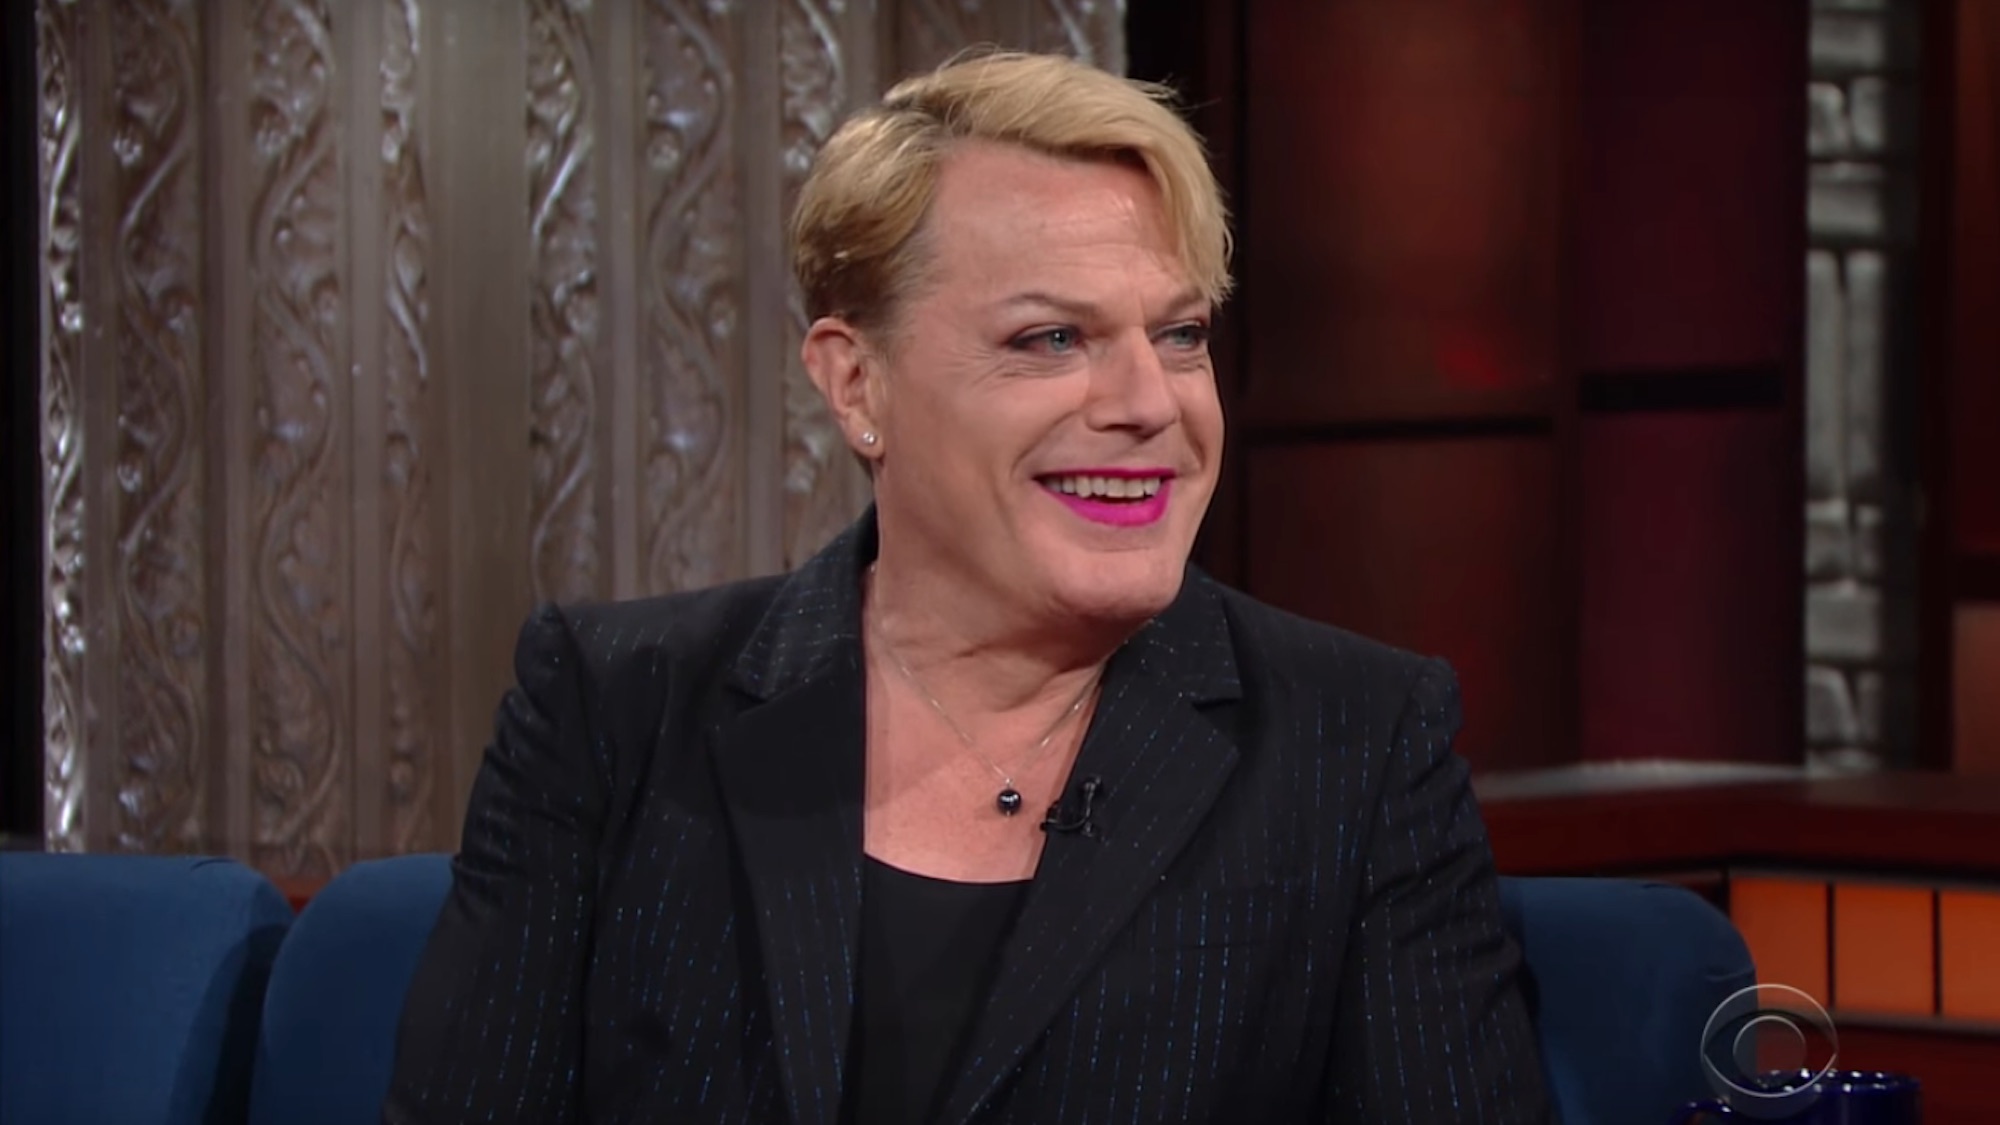 Eddie izzard joins busking and entertainment restriction proposals south london news